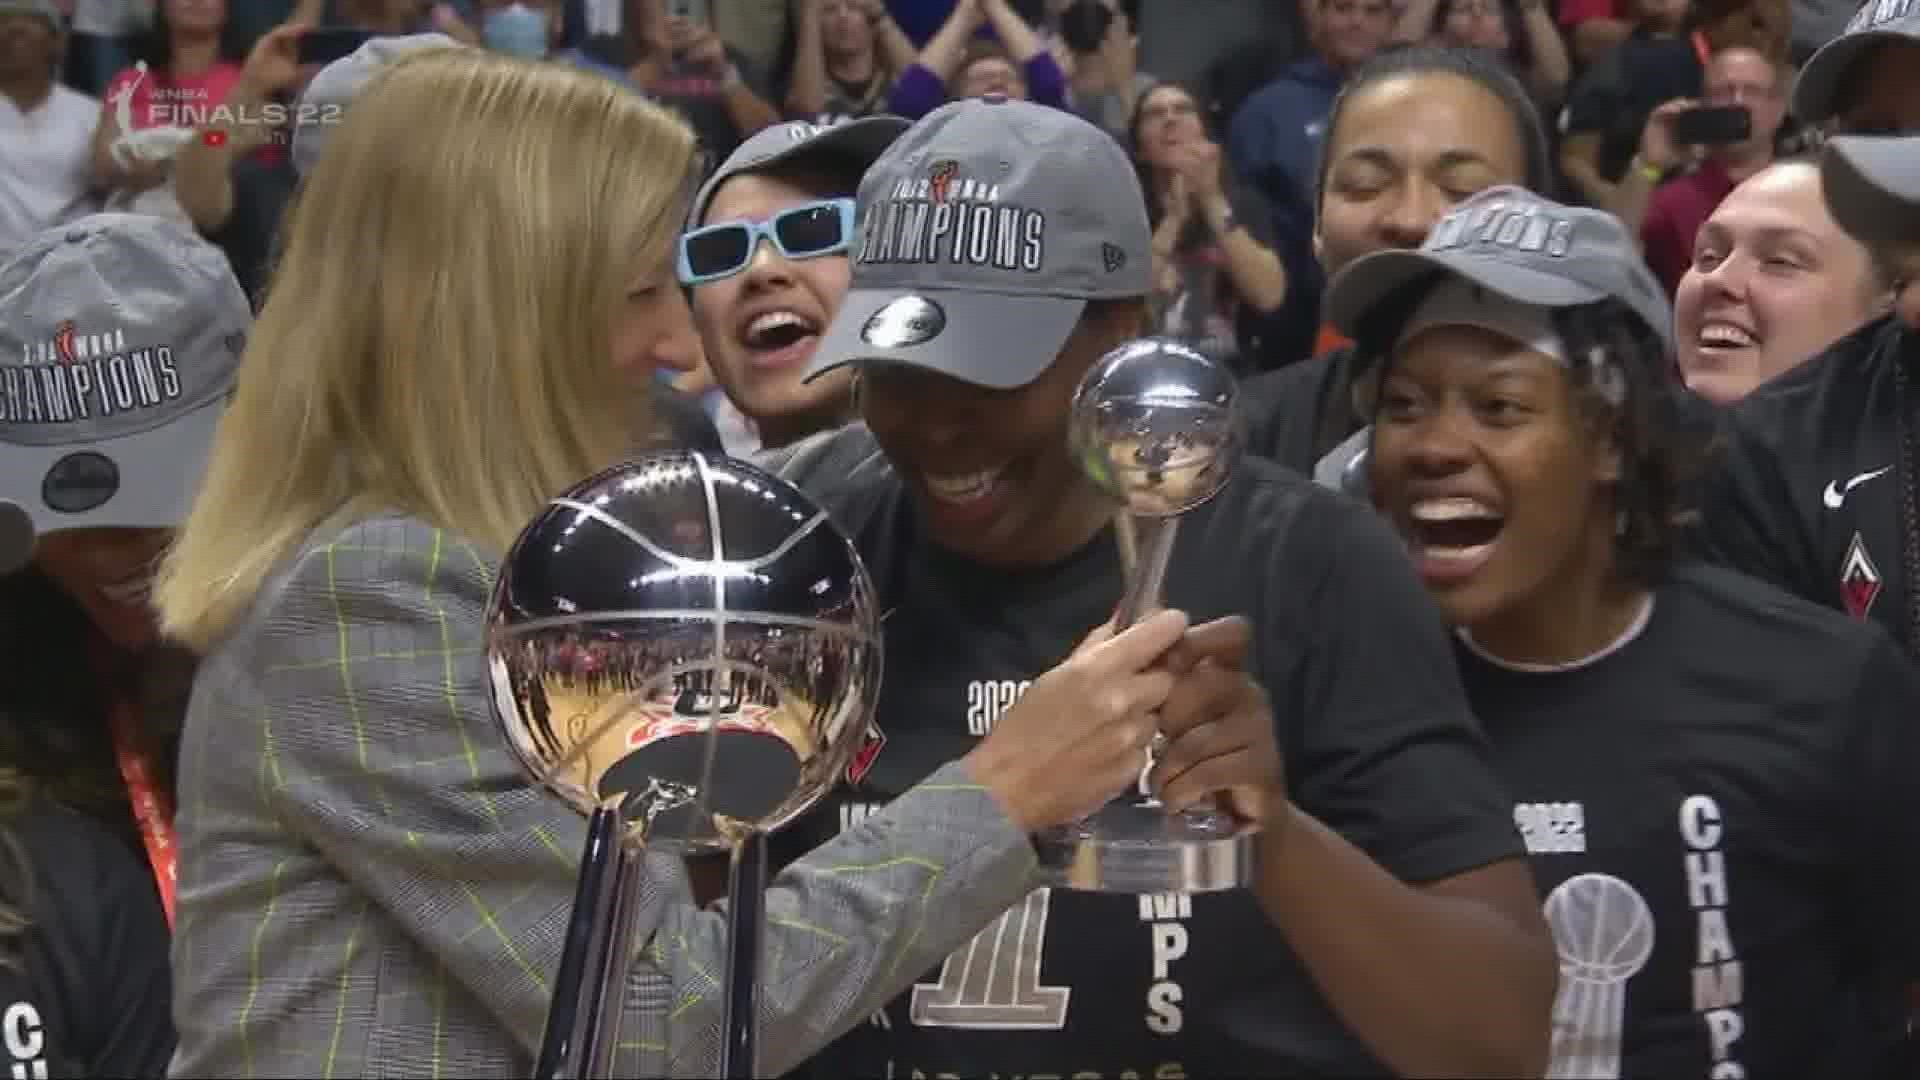 The 2010 graduate went on to become one of the WNBA's best recent players, and now St. Mary's High School in Stockton are celebrating her success.